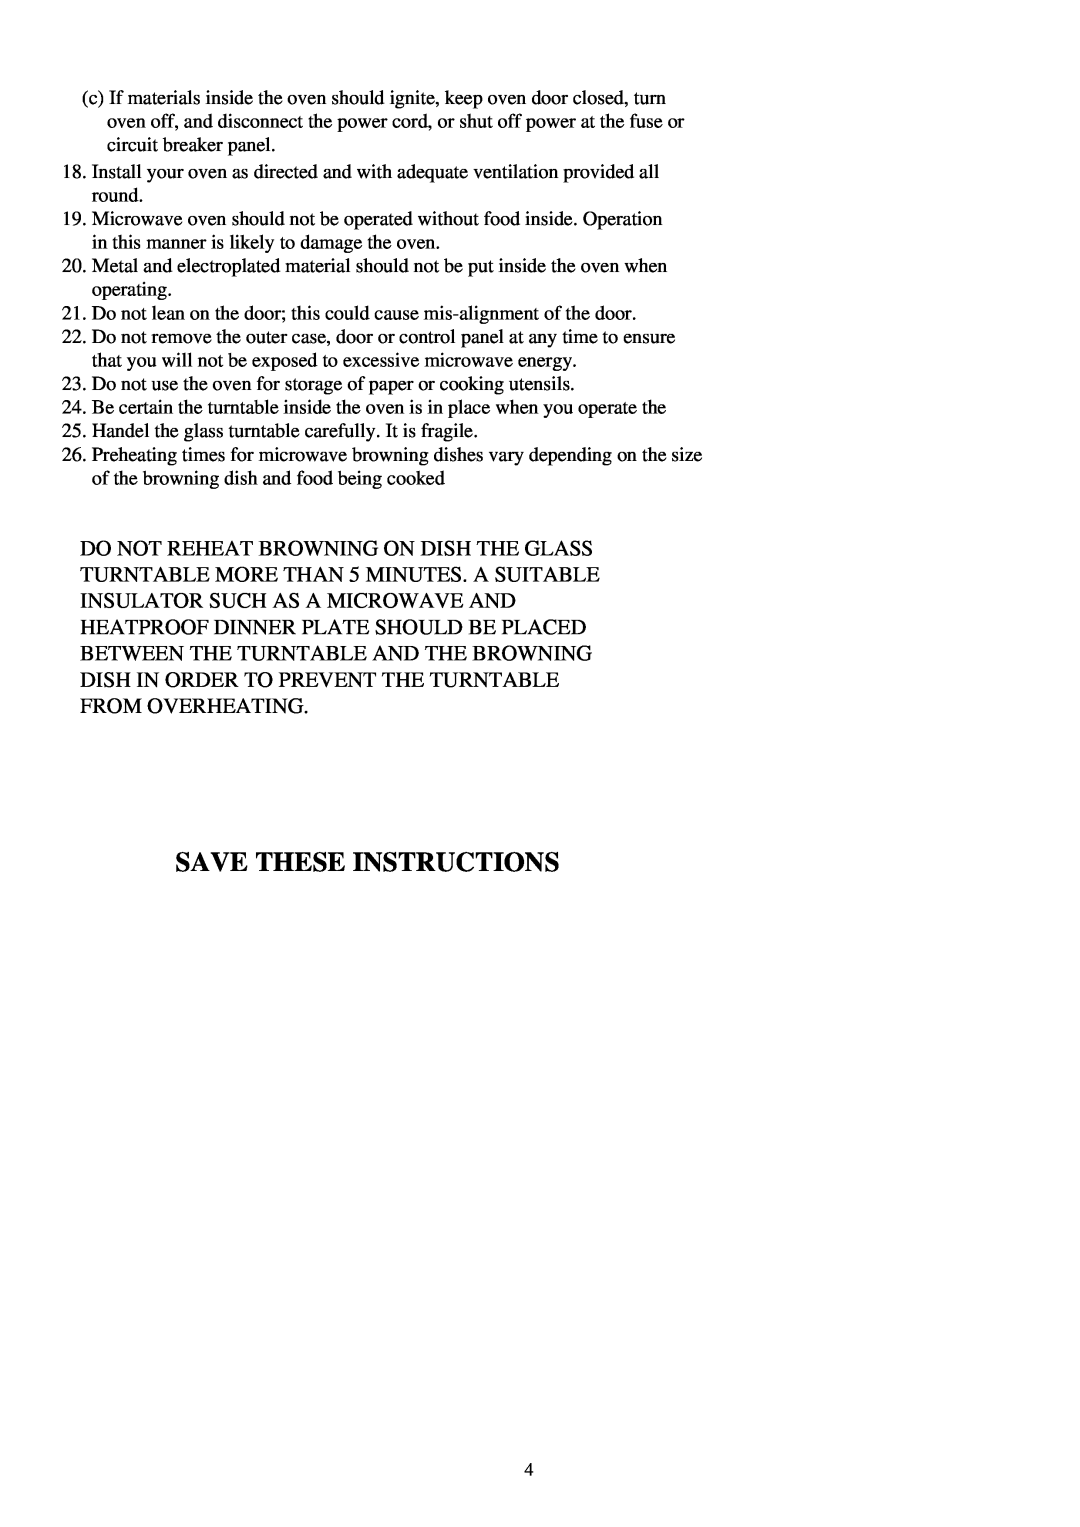 Palsonic PMO-800 instruction manual Save These Instructions 